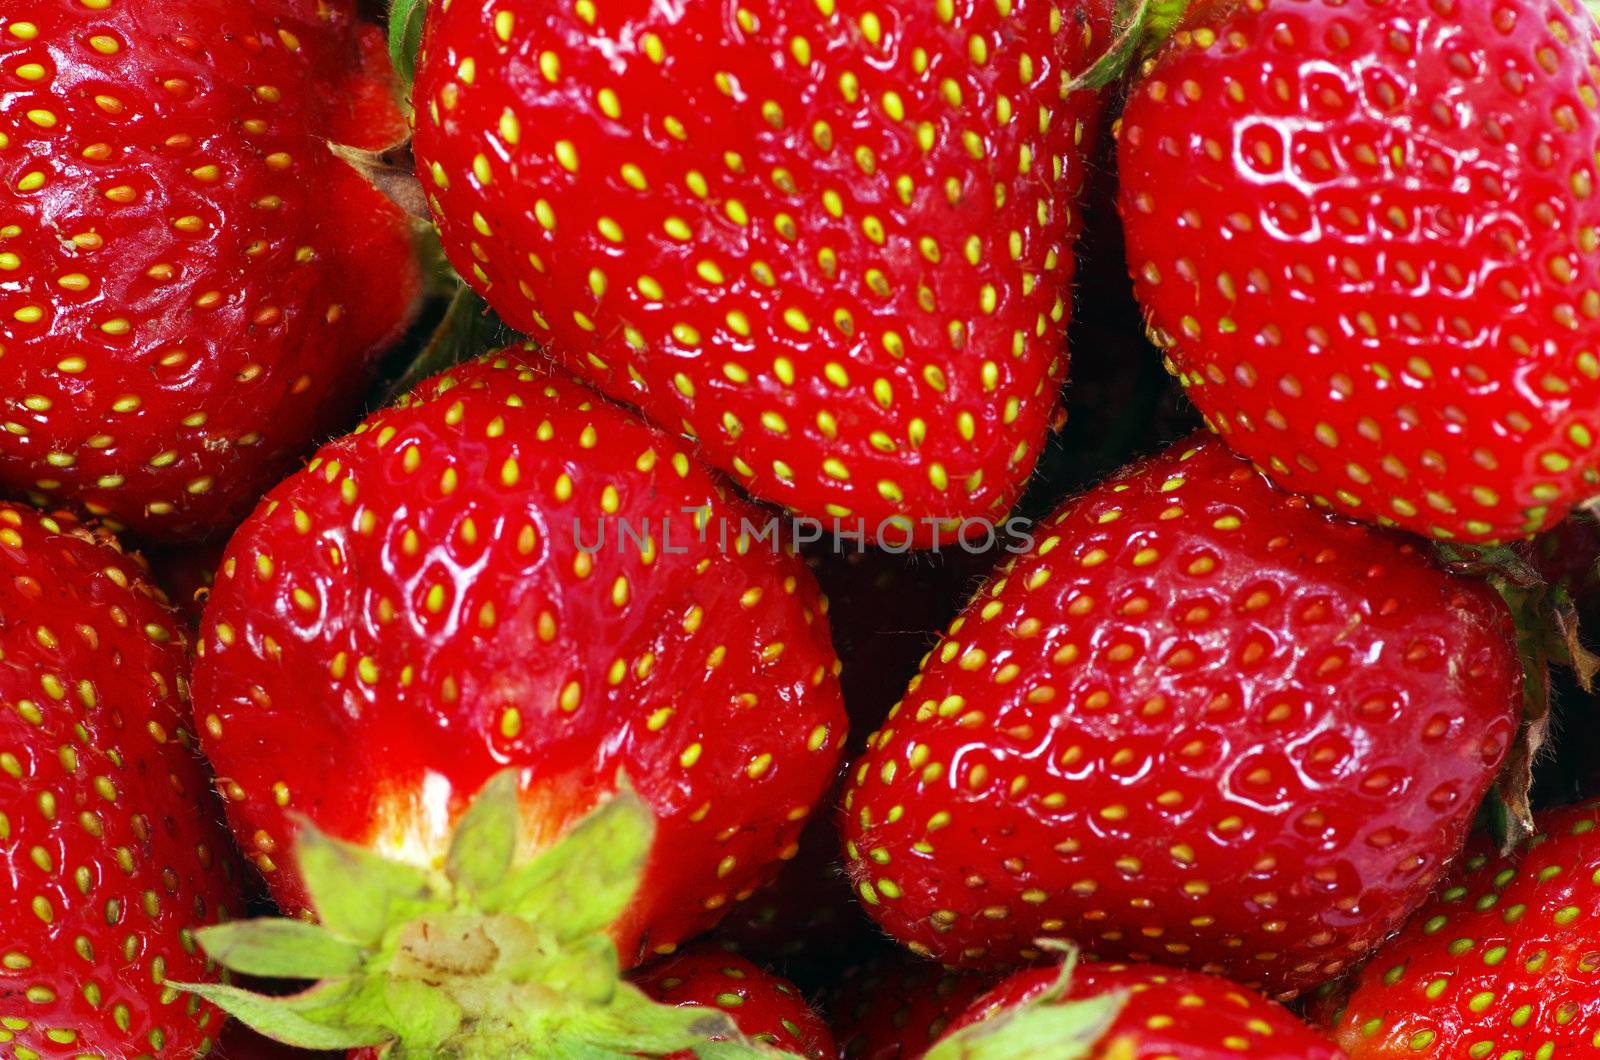 macro of a strawberry texture